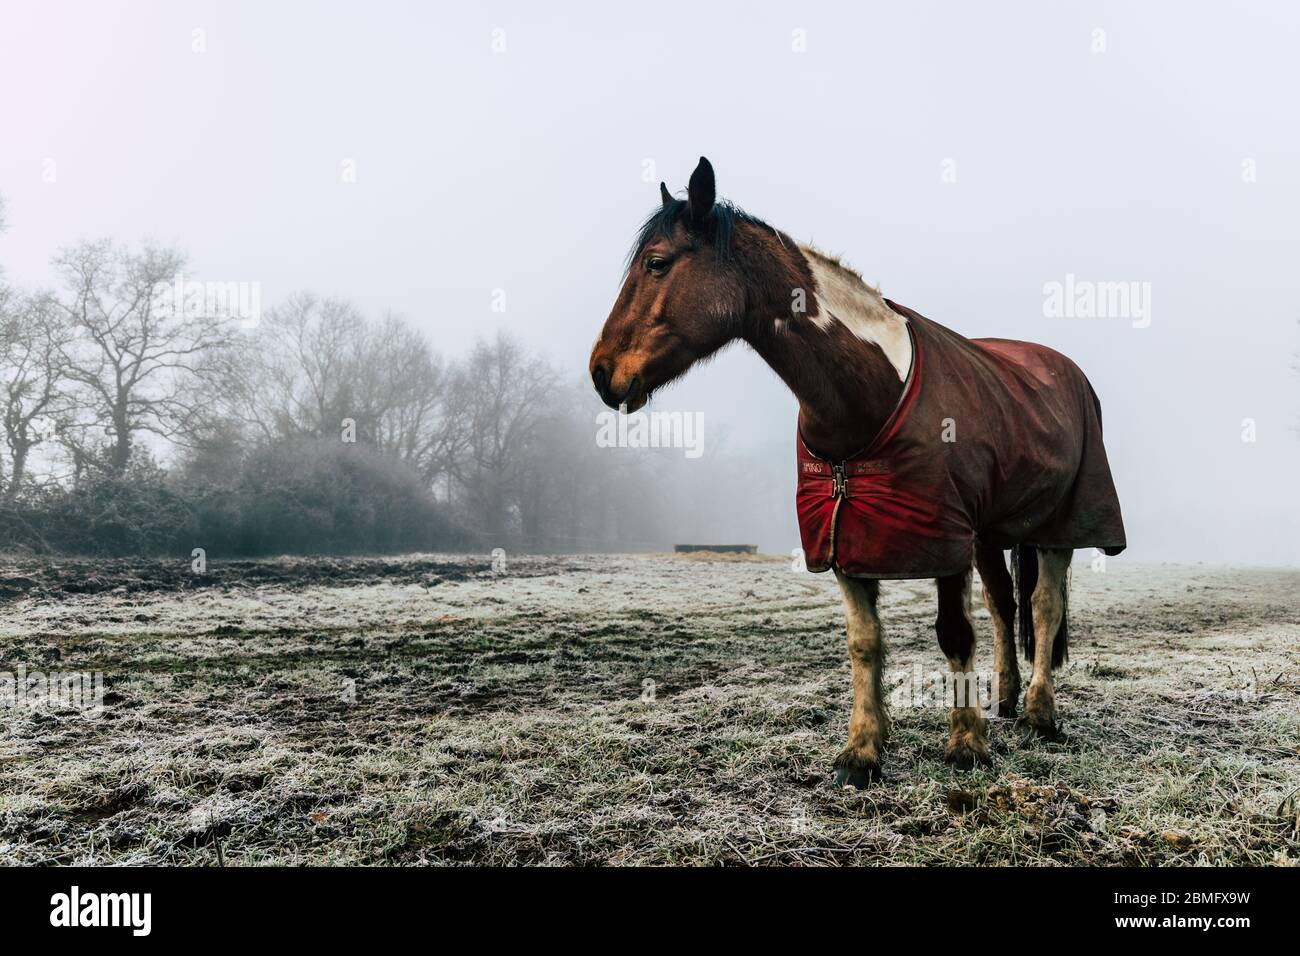 A single horse in a foggy field Stock Photo